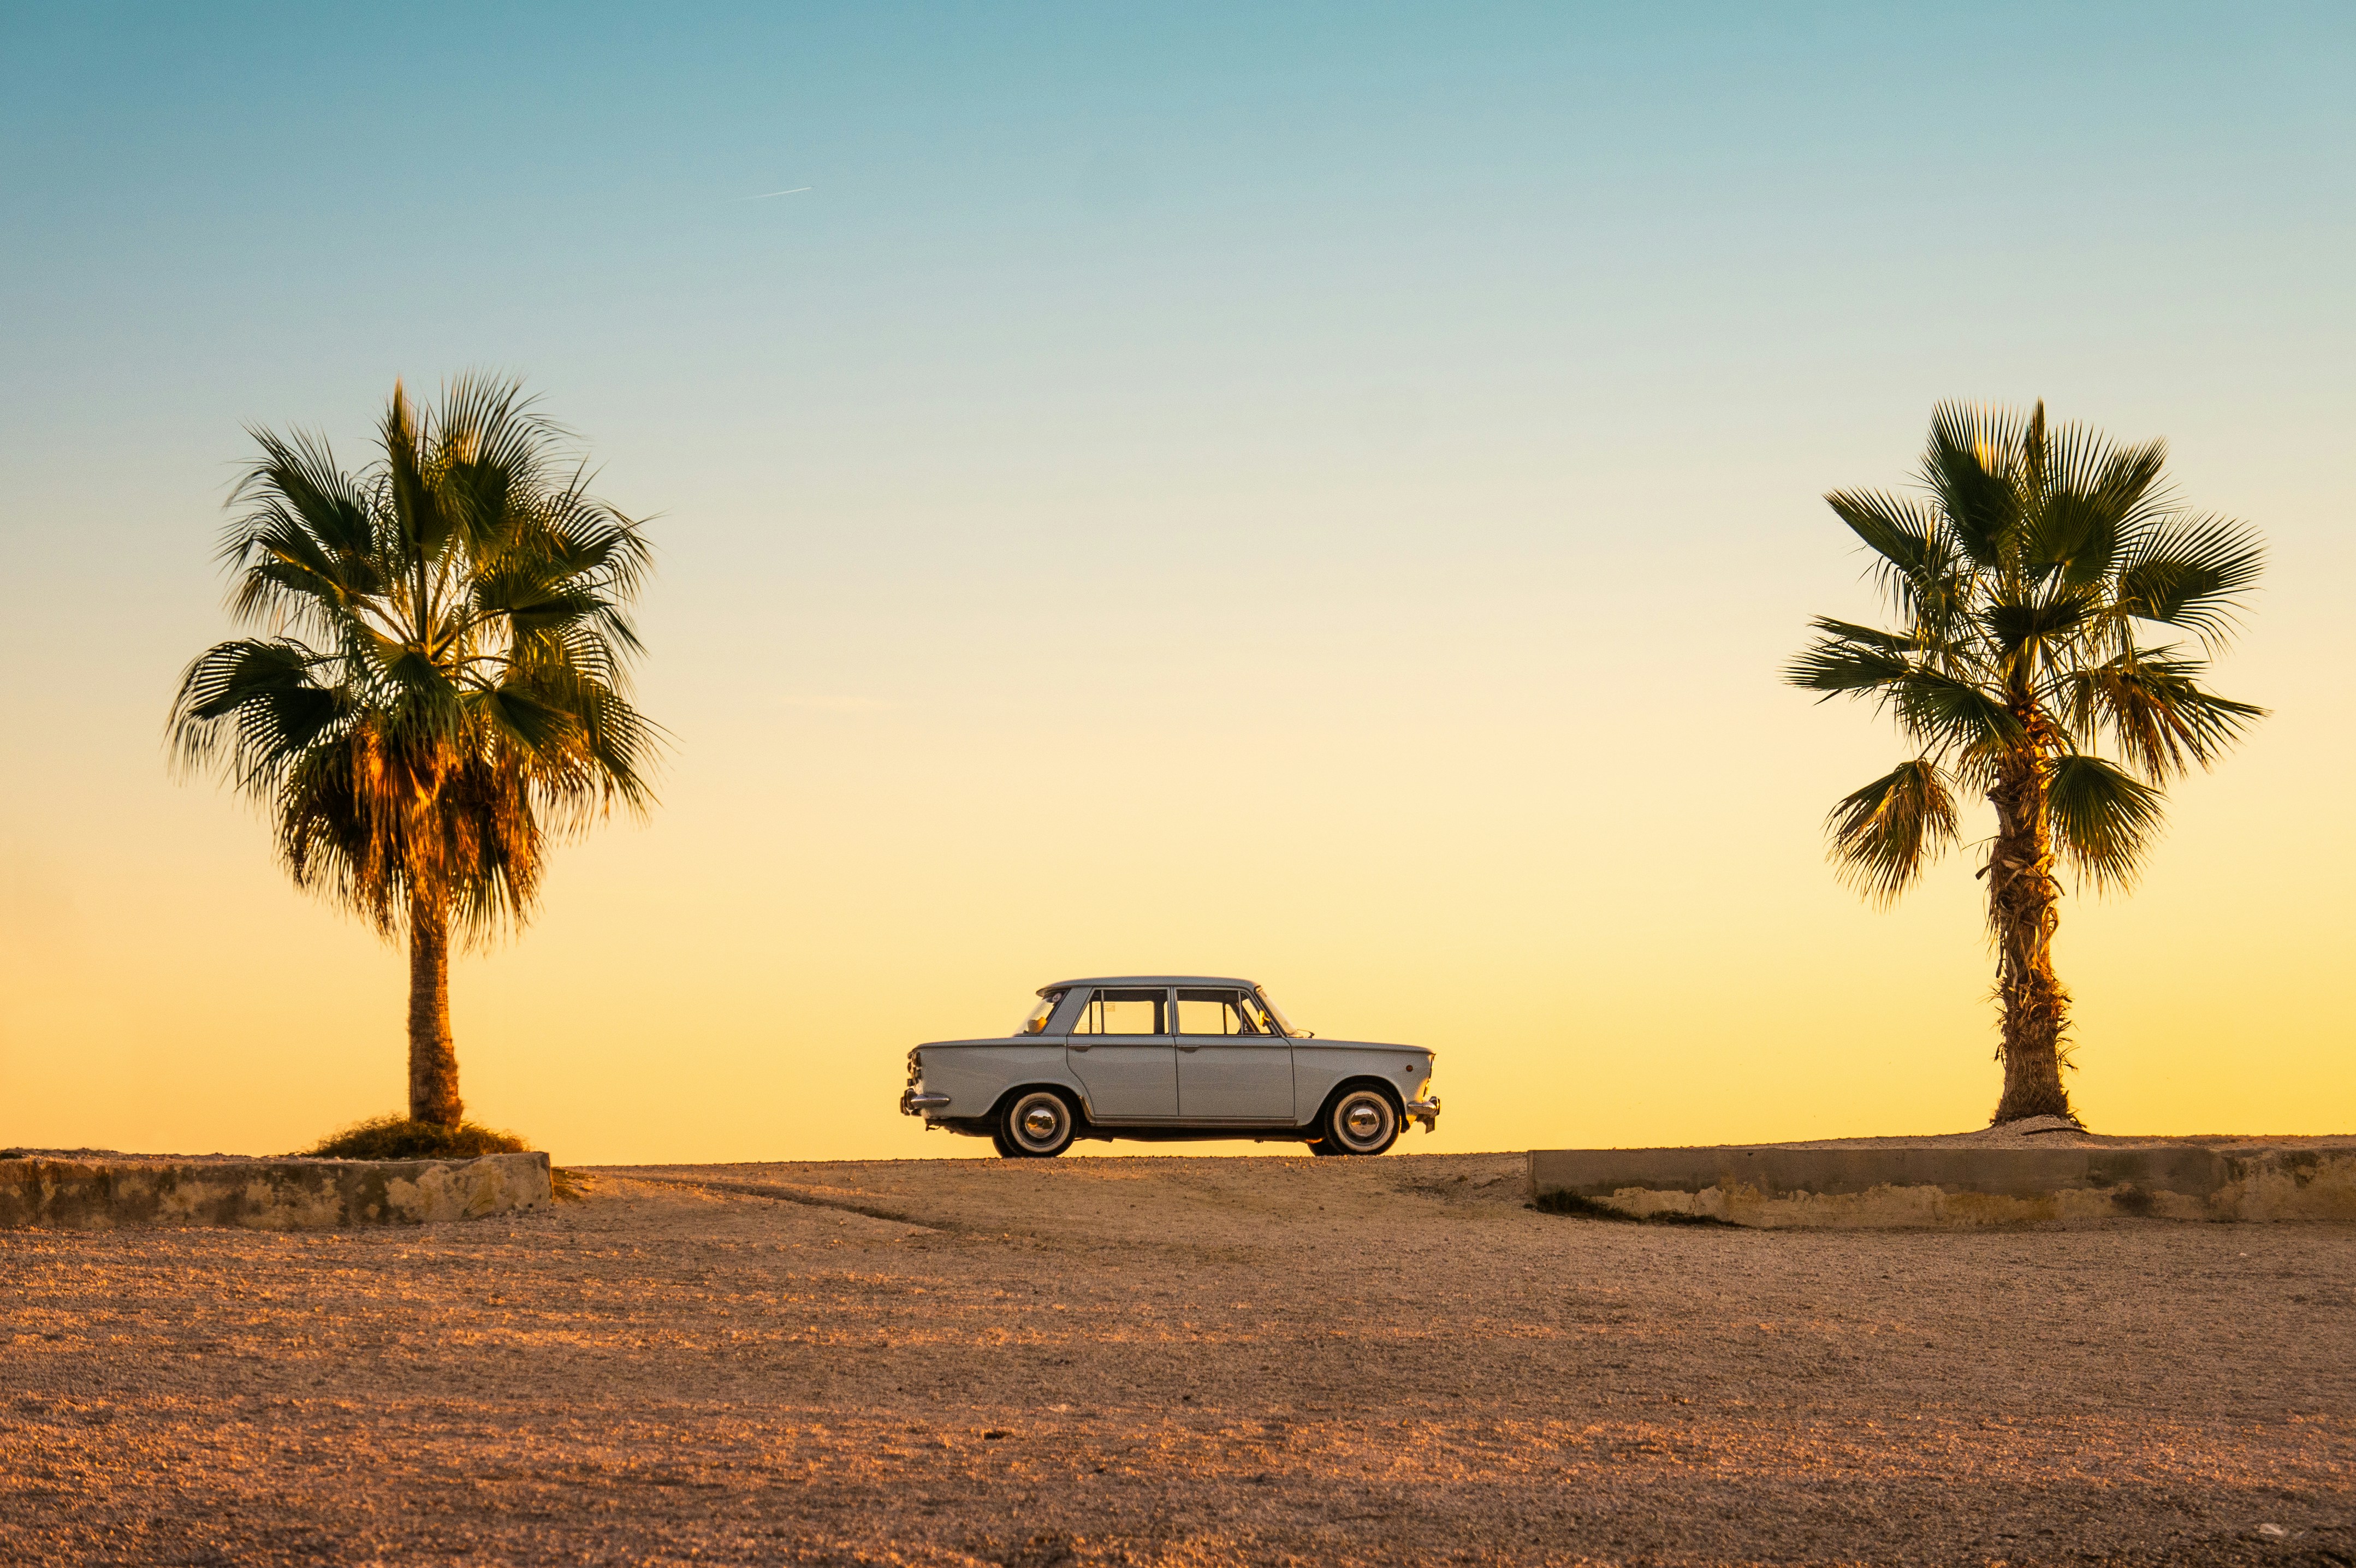 great photo recipe,how to photograph white and black car on brown sand during daytime